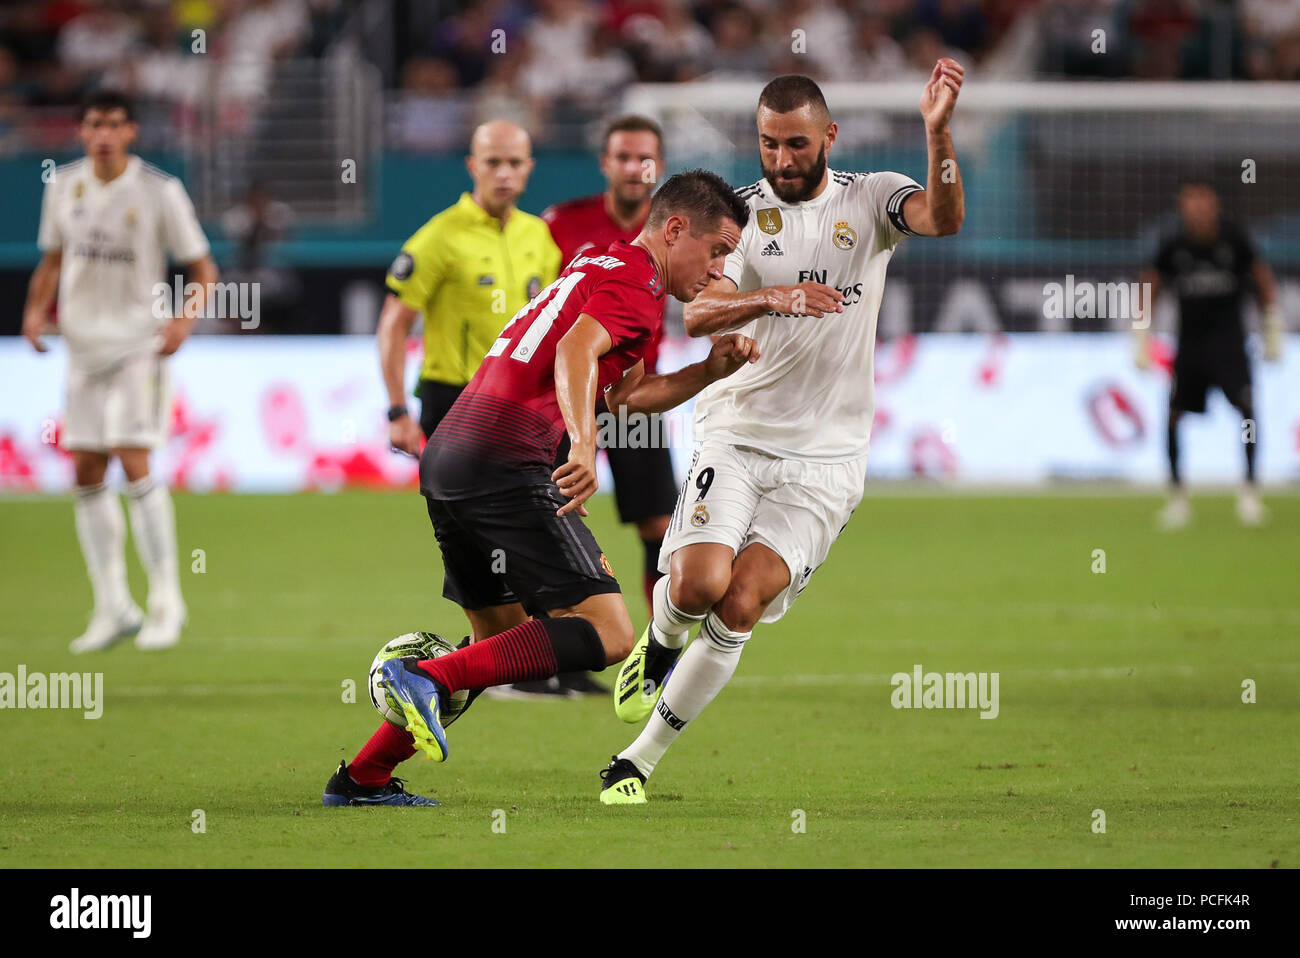 Miami Gardens, Florida, USA. 31st July, 2018. Manchester United F.C. midfielder Ander Herrera (21) fights for the ball with Real Madrid C.F. forward Karim Mostafa Benzema (9) during an International Champions Cup match between Real Madrid C.F. and Manchester United F.C. at the Hard Rock Stadium in Miami Gardens, Florida. Manchester United F.C. won the game 2-1. Credit: Mario Houben/ZUMA Wire/Alamy Live News Stock Photo